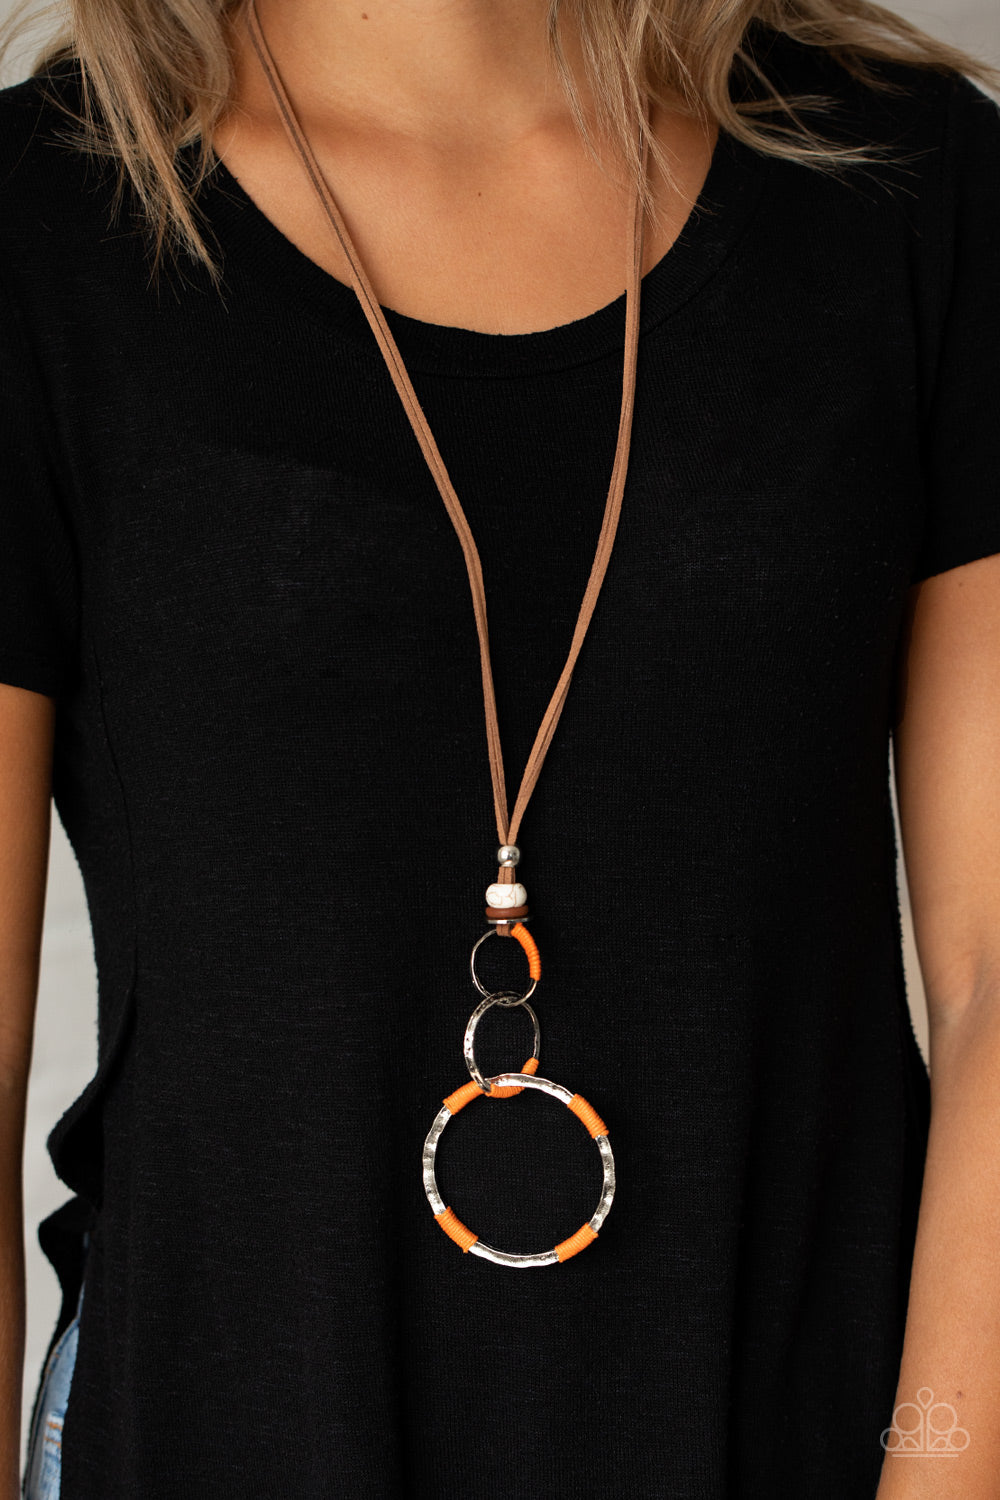 Rural Renovation - Orange - Brown Suede Necklace - Paparazzi Accessories - Wrapped in sections of orange threaded accents, a mismatched trio of hammered silver rings link at the bottom of a beaded fitting. The earthy compilation is attached to lengthened strands of brown suede for an authentic finish. Features an adjustable clasp closure. Sold as one individual necklace.